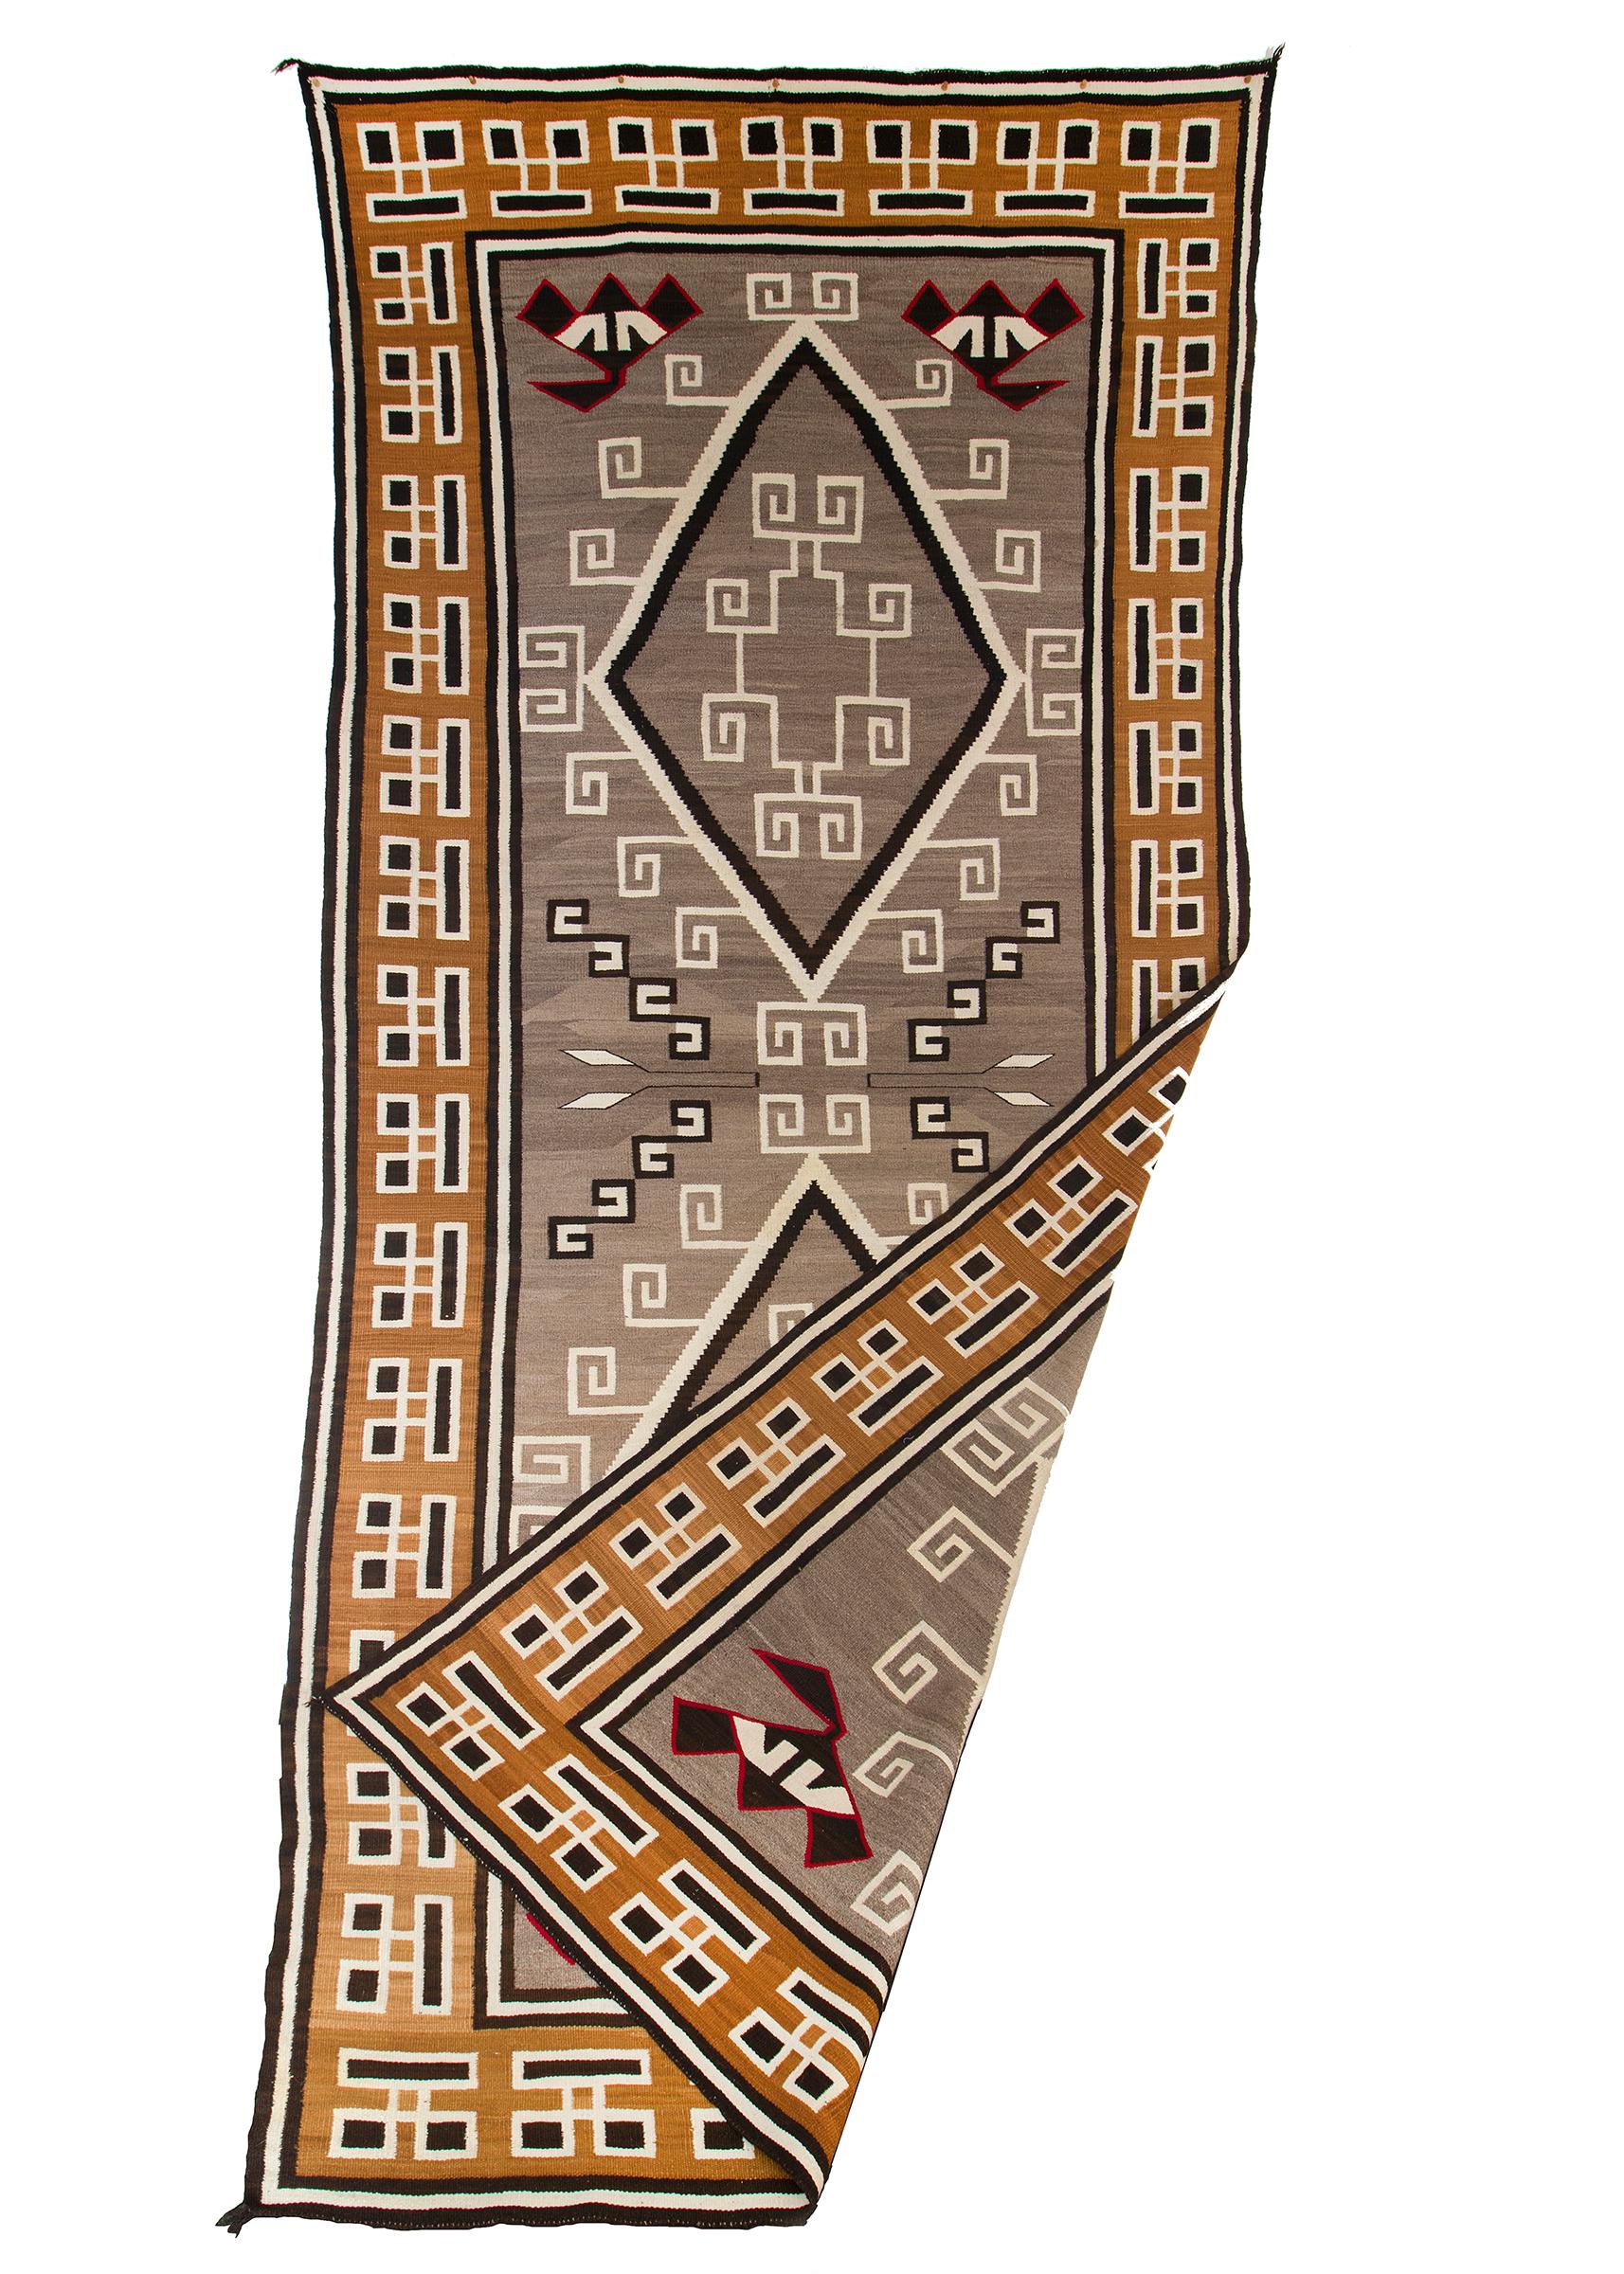 Vintage Navajo trading post rug, circa 1910-1920. Crystal Ganado design handwoven of native hand-spun wool in natural fleece colors with aniline dyed red. This large area rug is well suited for use on the floor or as a wall hanging.